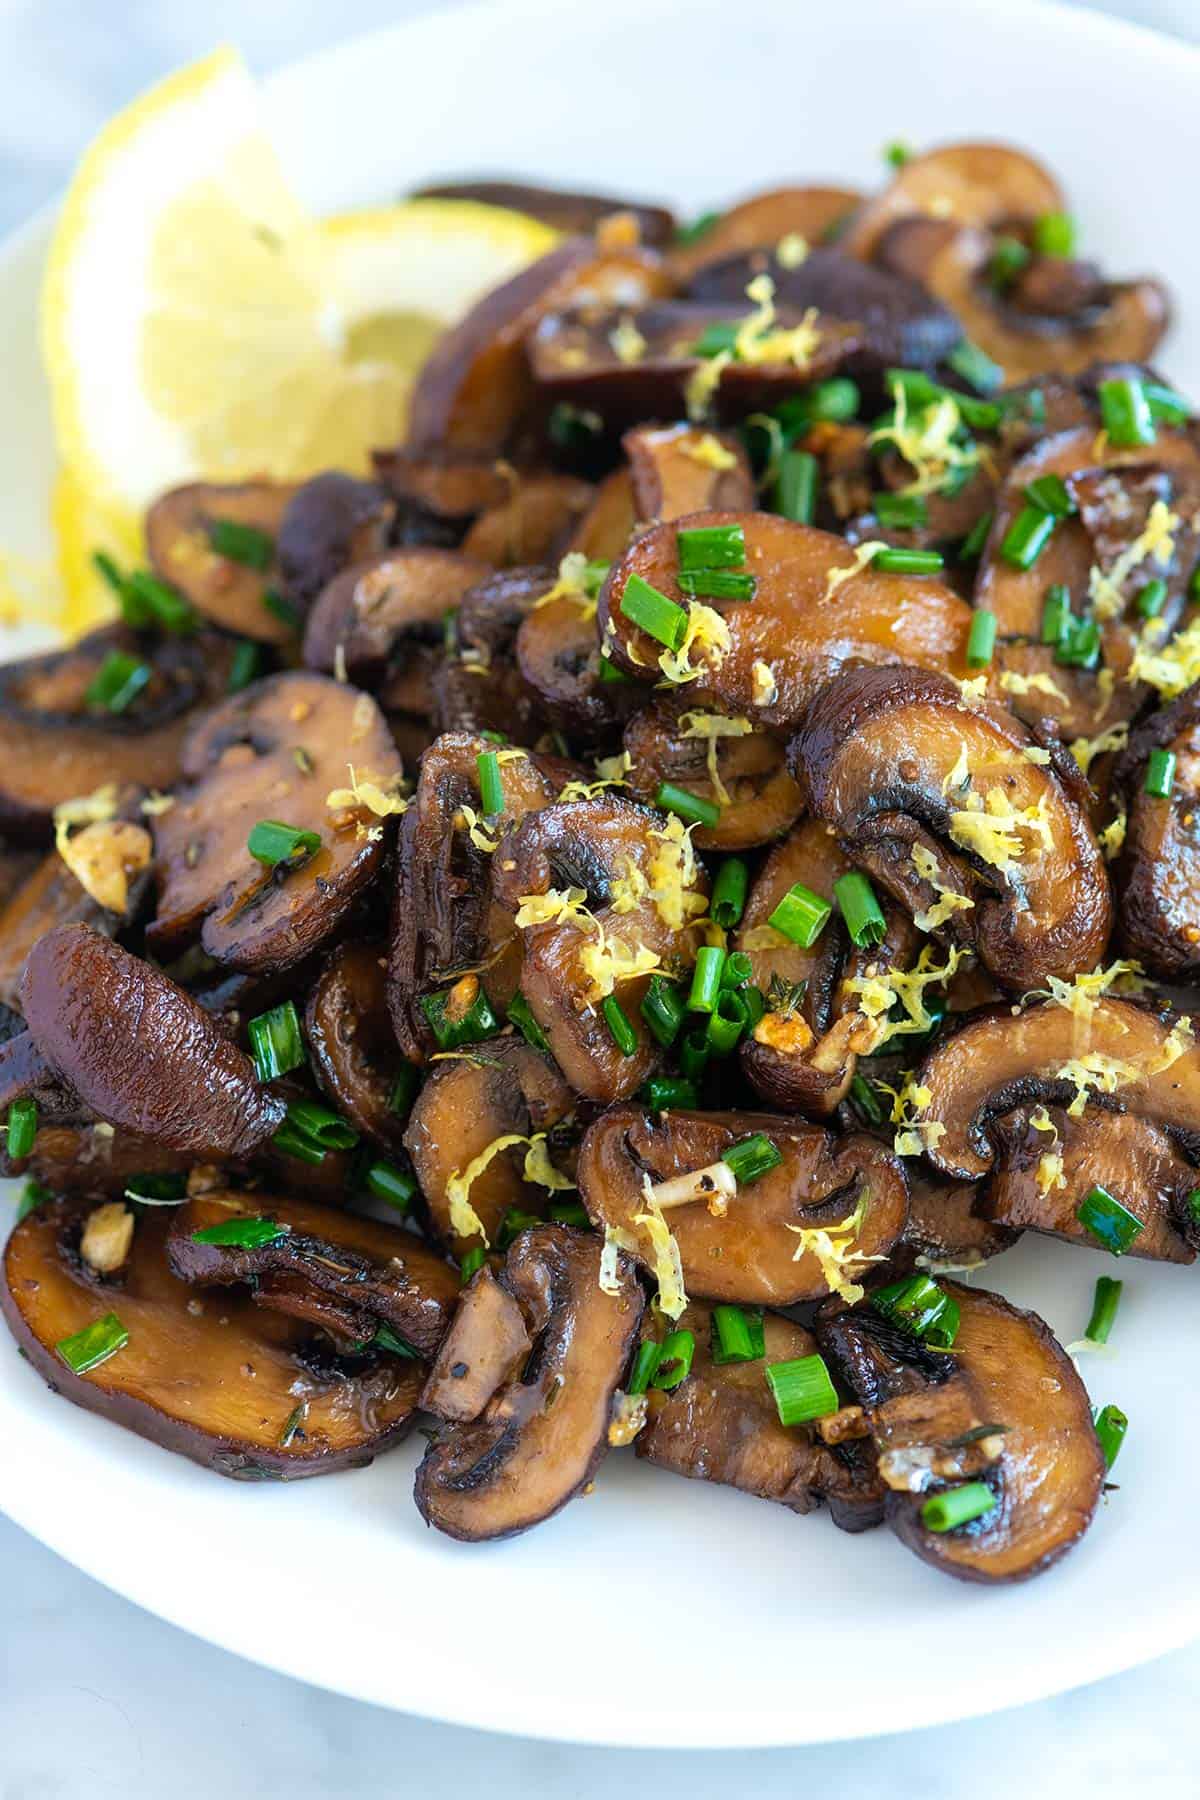 How to make deeply flavored oven roasted mushrooms with perfect brown edges. Use any type or size of mushroom!